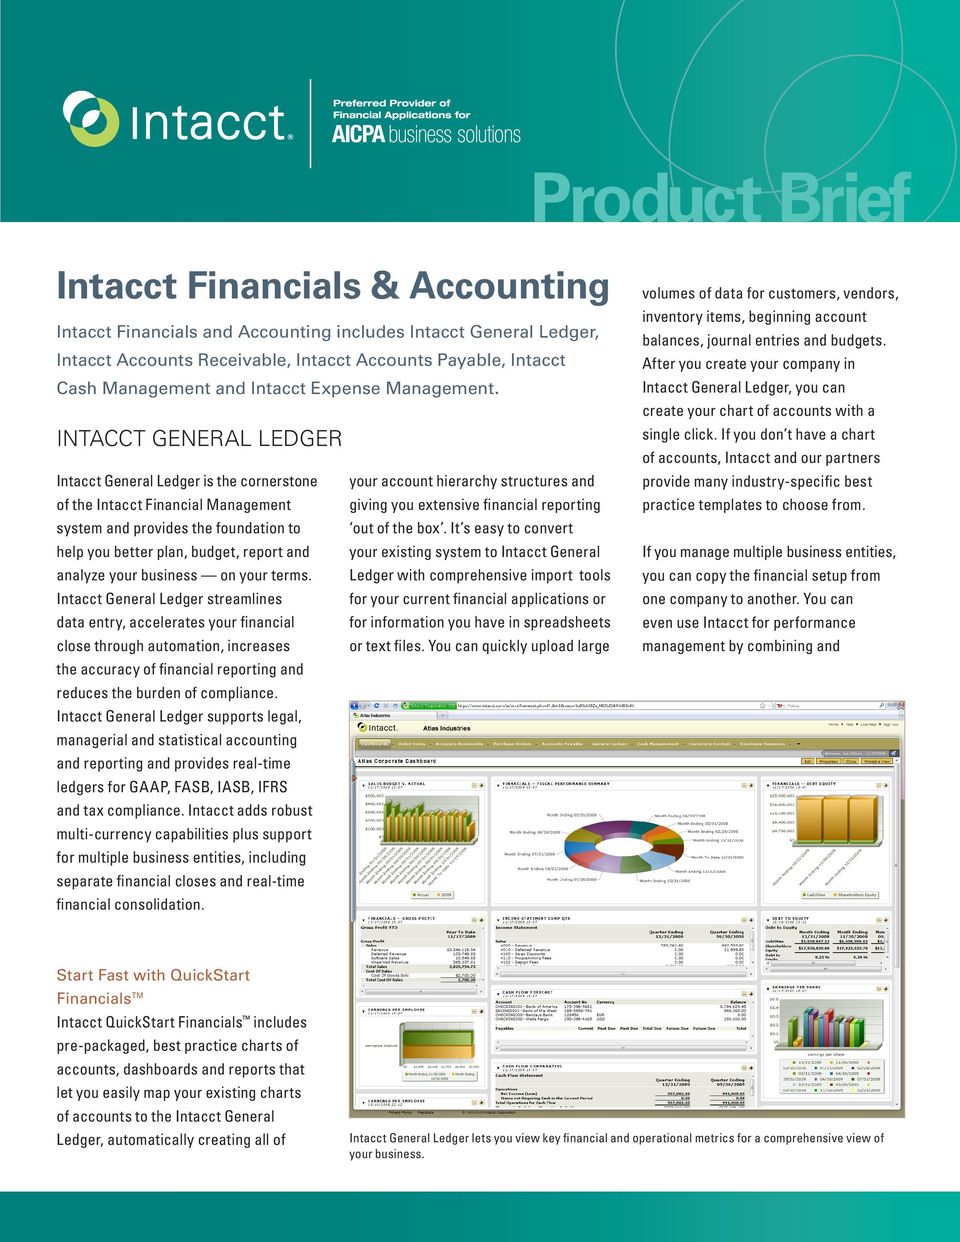 Intacct General Ledger Intacct General Ledger is the cornerstone your account hierarchy structures and of the Intacct Financial Management giving you extensive financial reporting system and provides